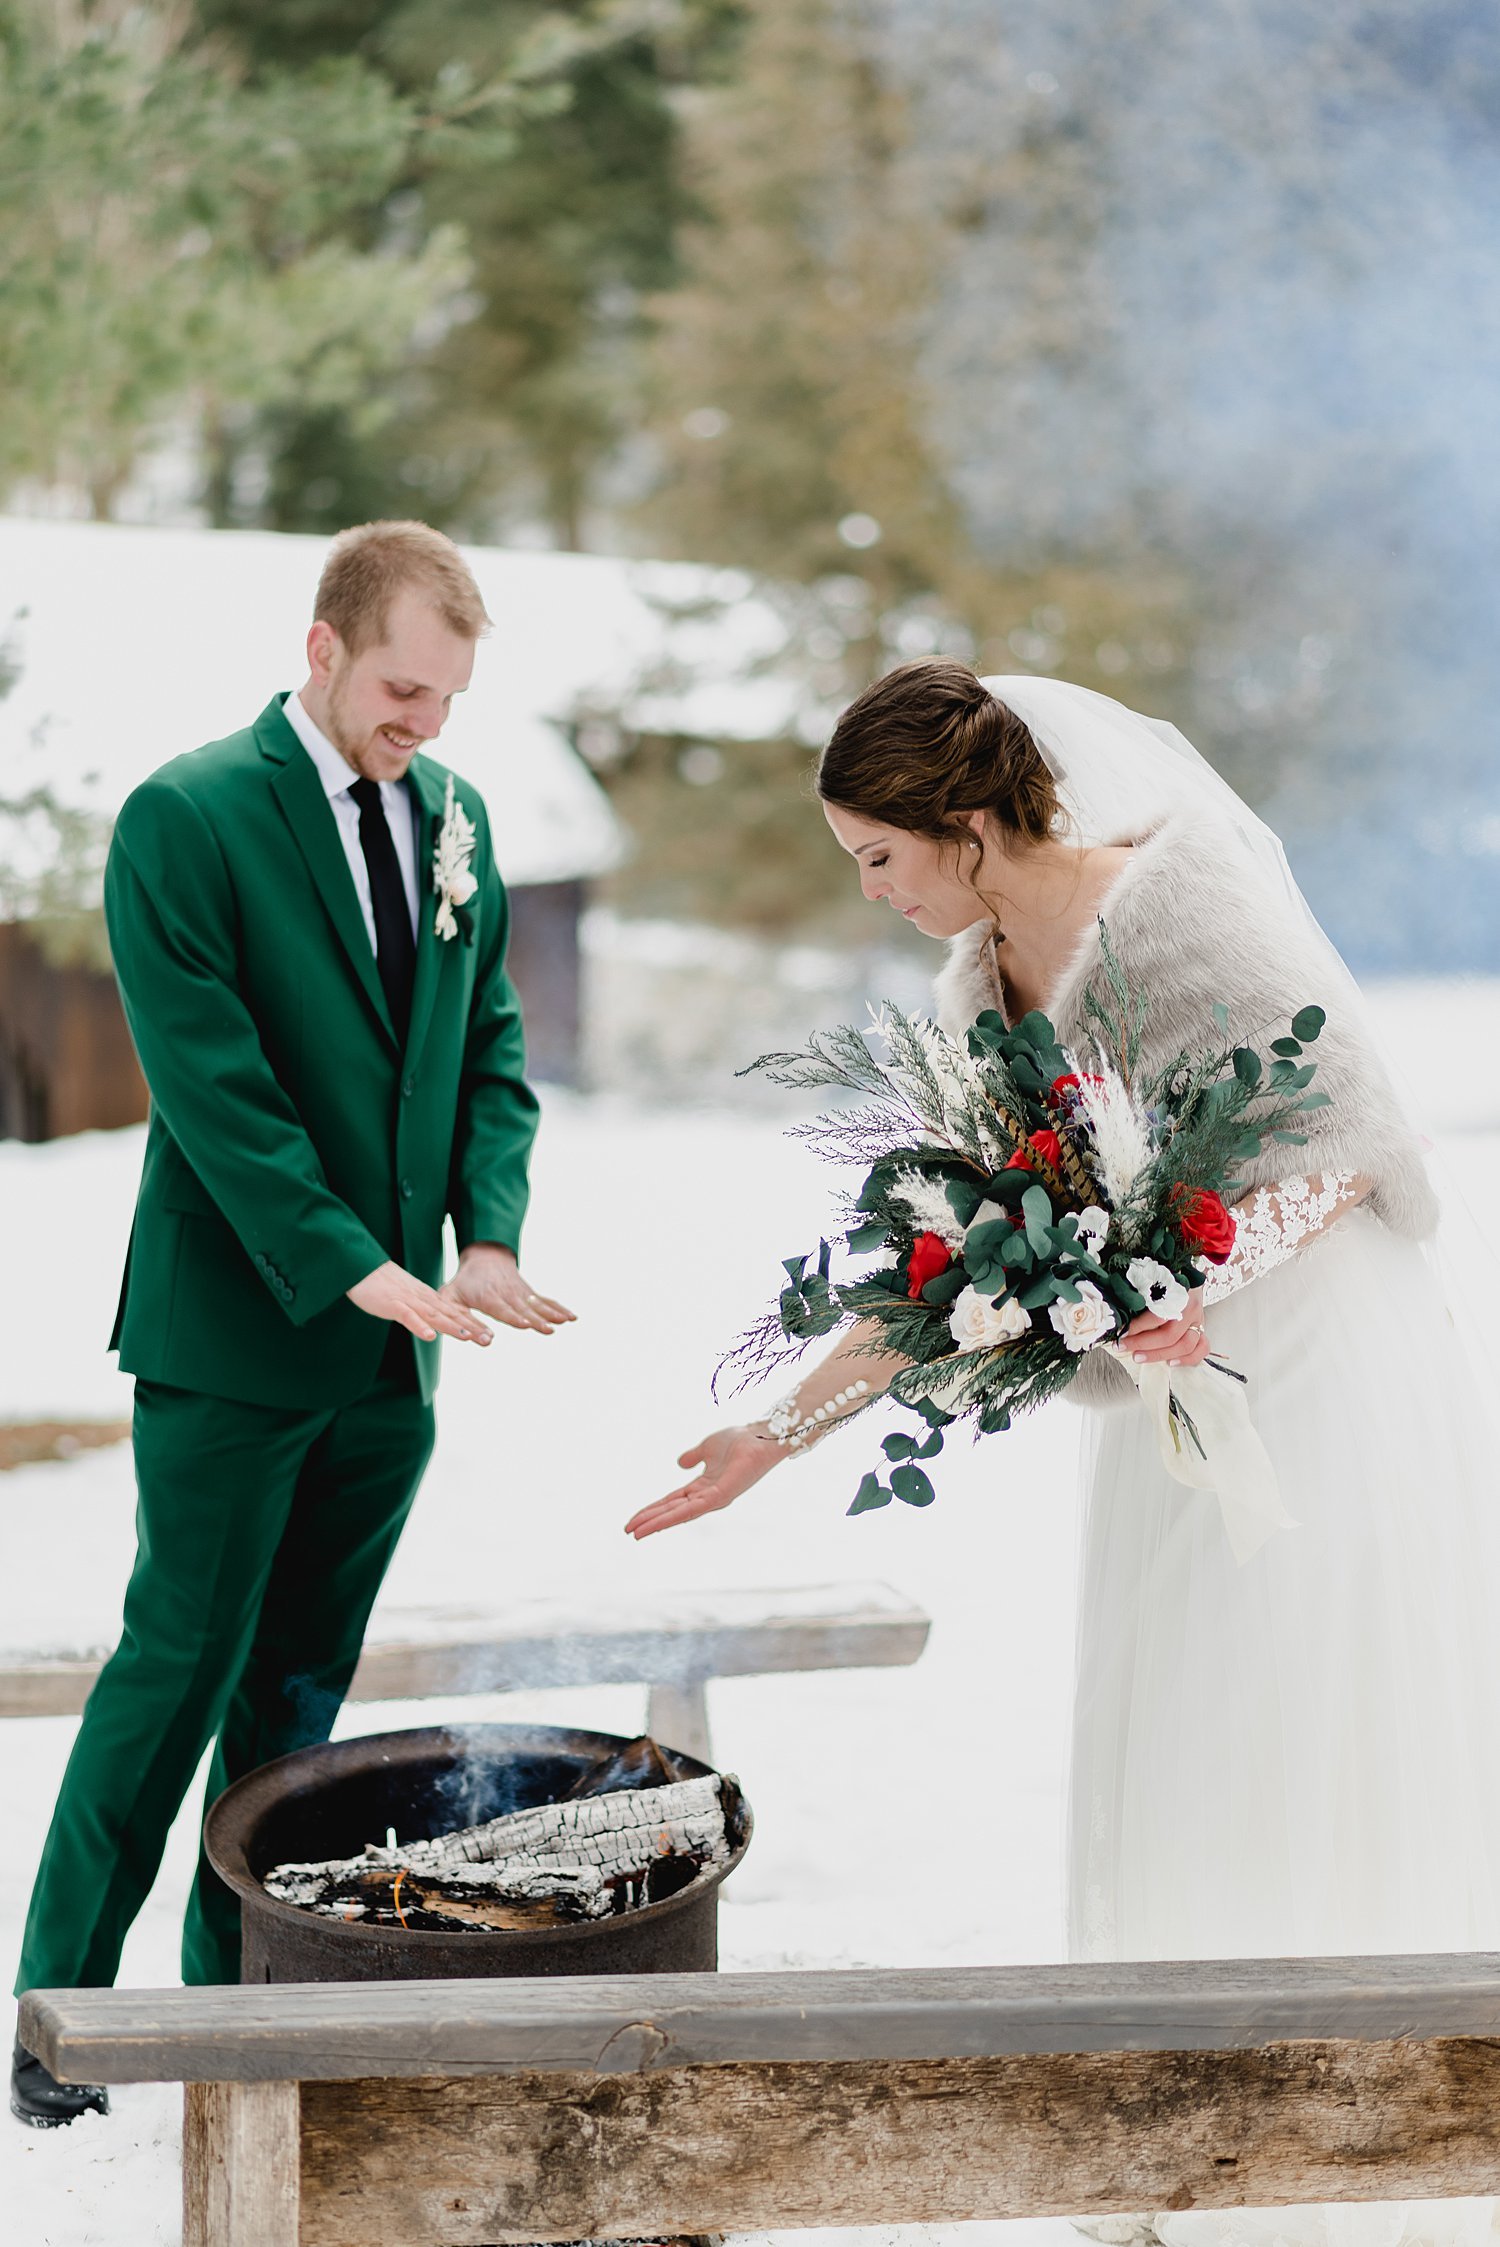 Intimate Winter Elopement at O'Hara Mill Homestead in Madoc, Ontario | Prince Edward County Wedding Photographer | Holly McMurter Photographs_0027.jpg